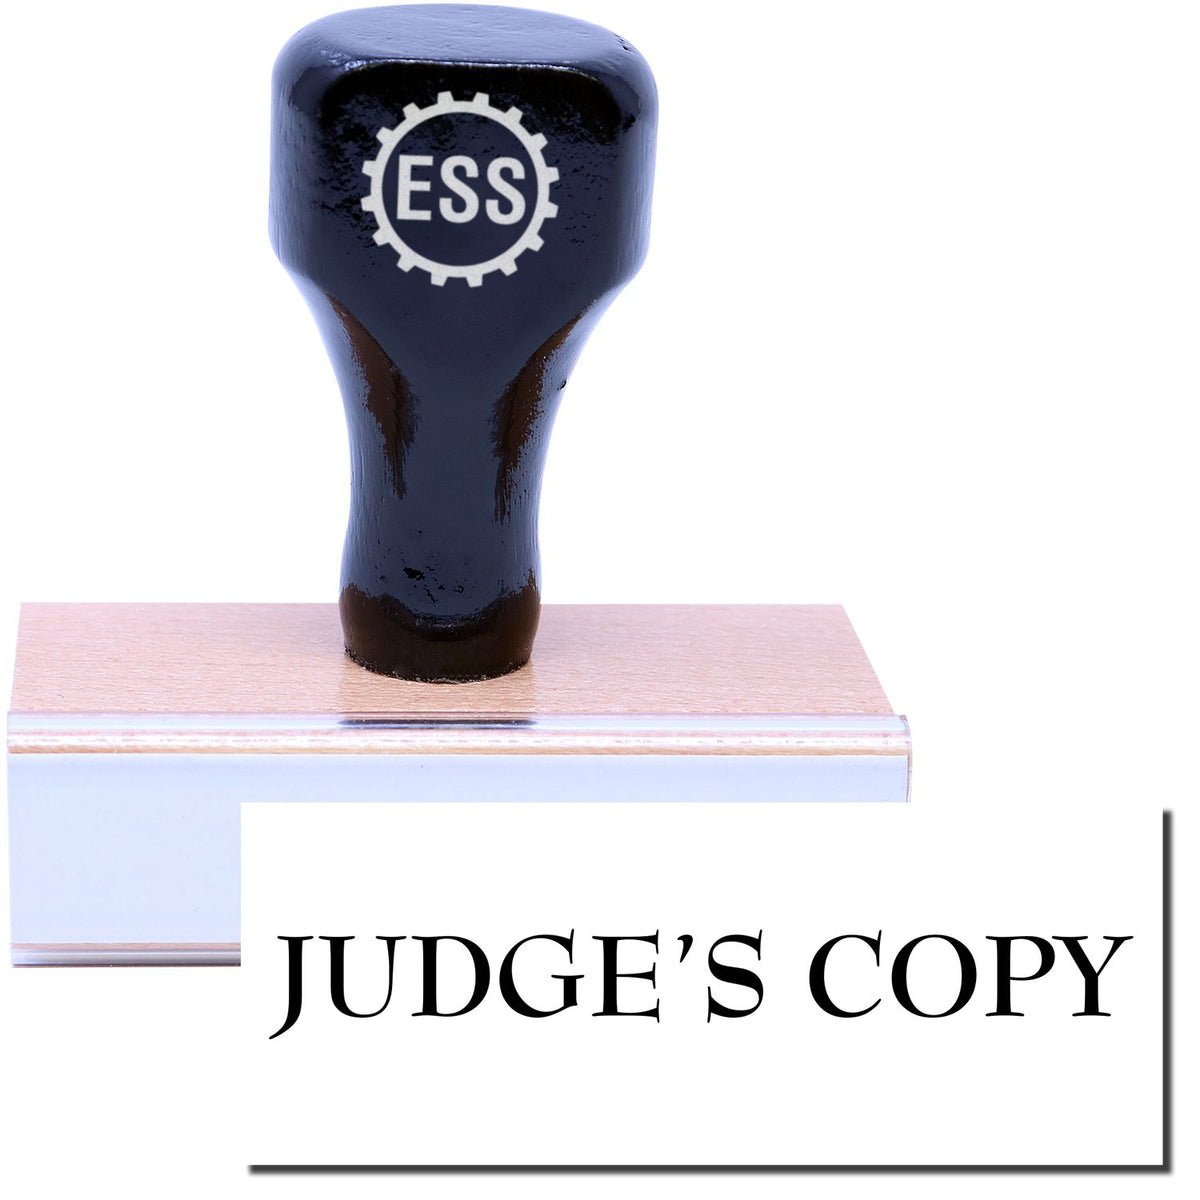 A stock office rubber stamp with a stamped image showing how the text &quot;JUDGE&#39;S COPY&quot; in a large font is displayed after stamping.